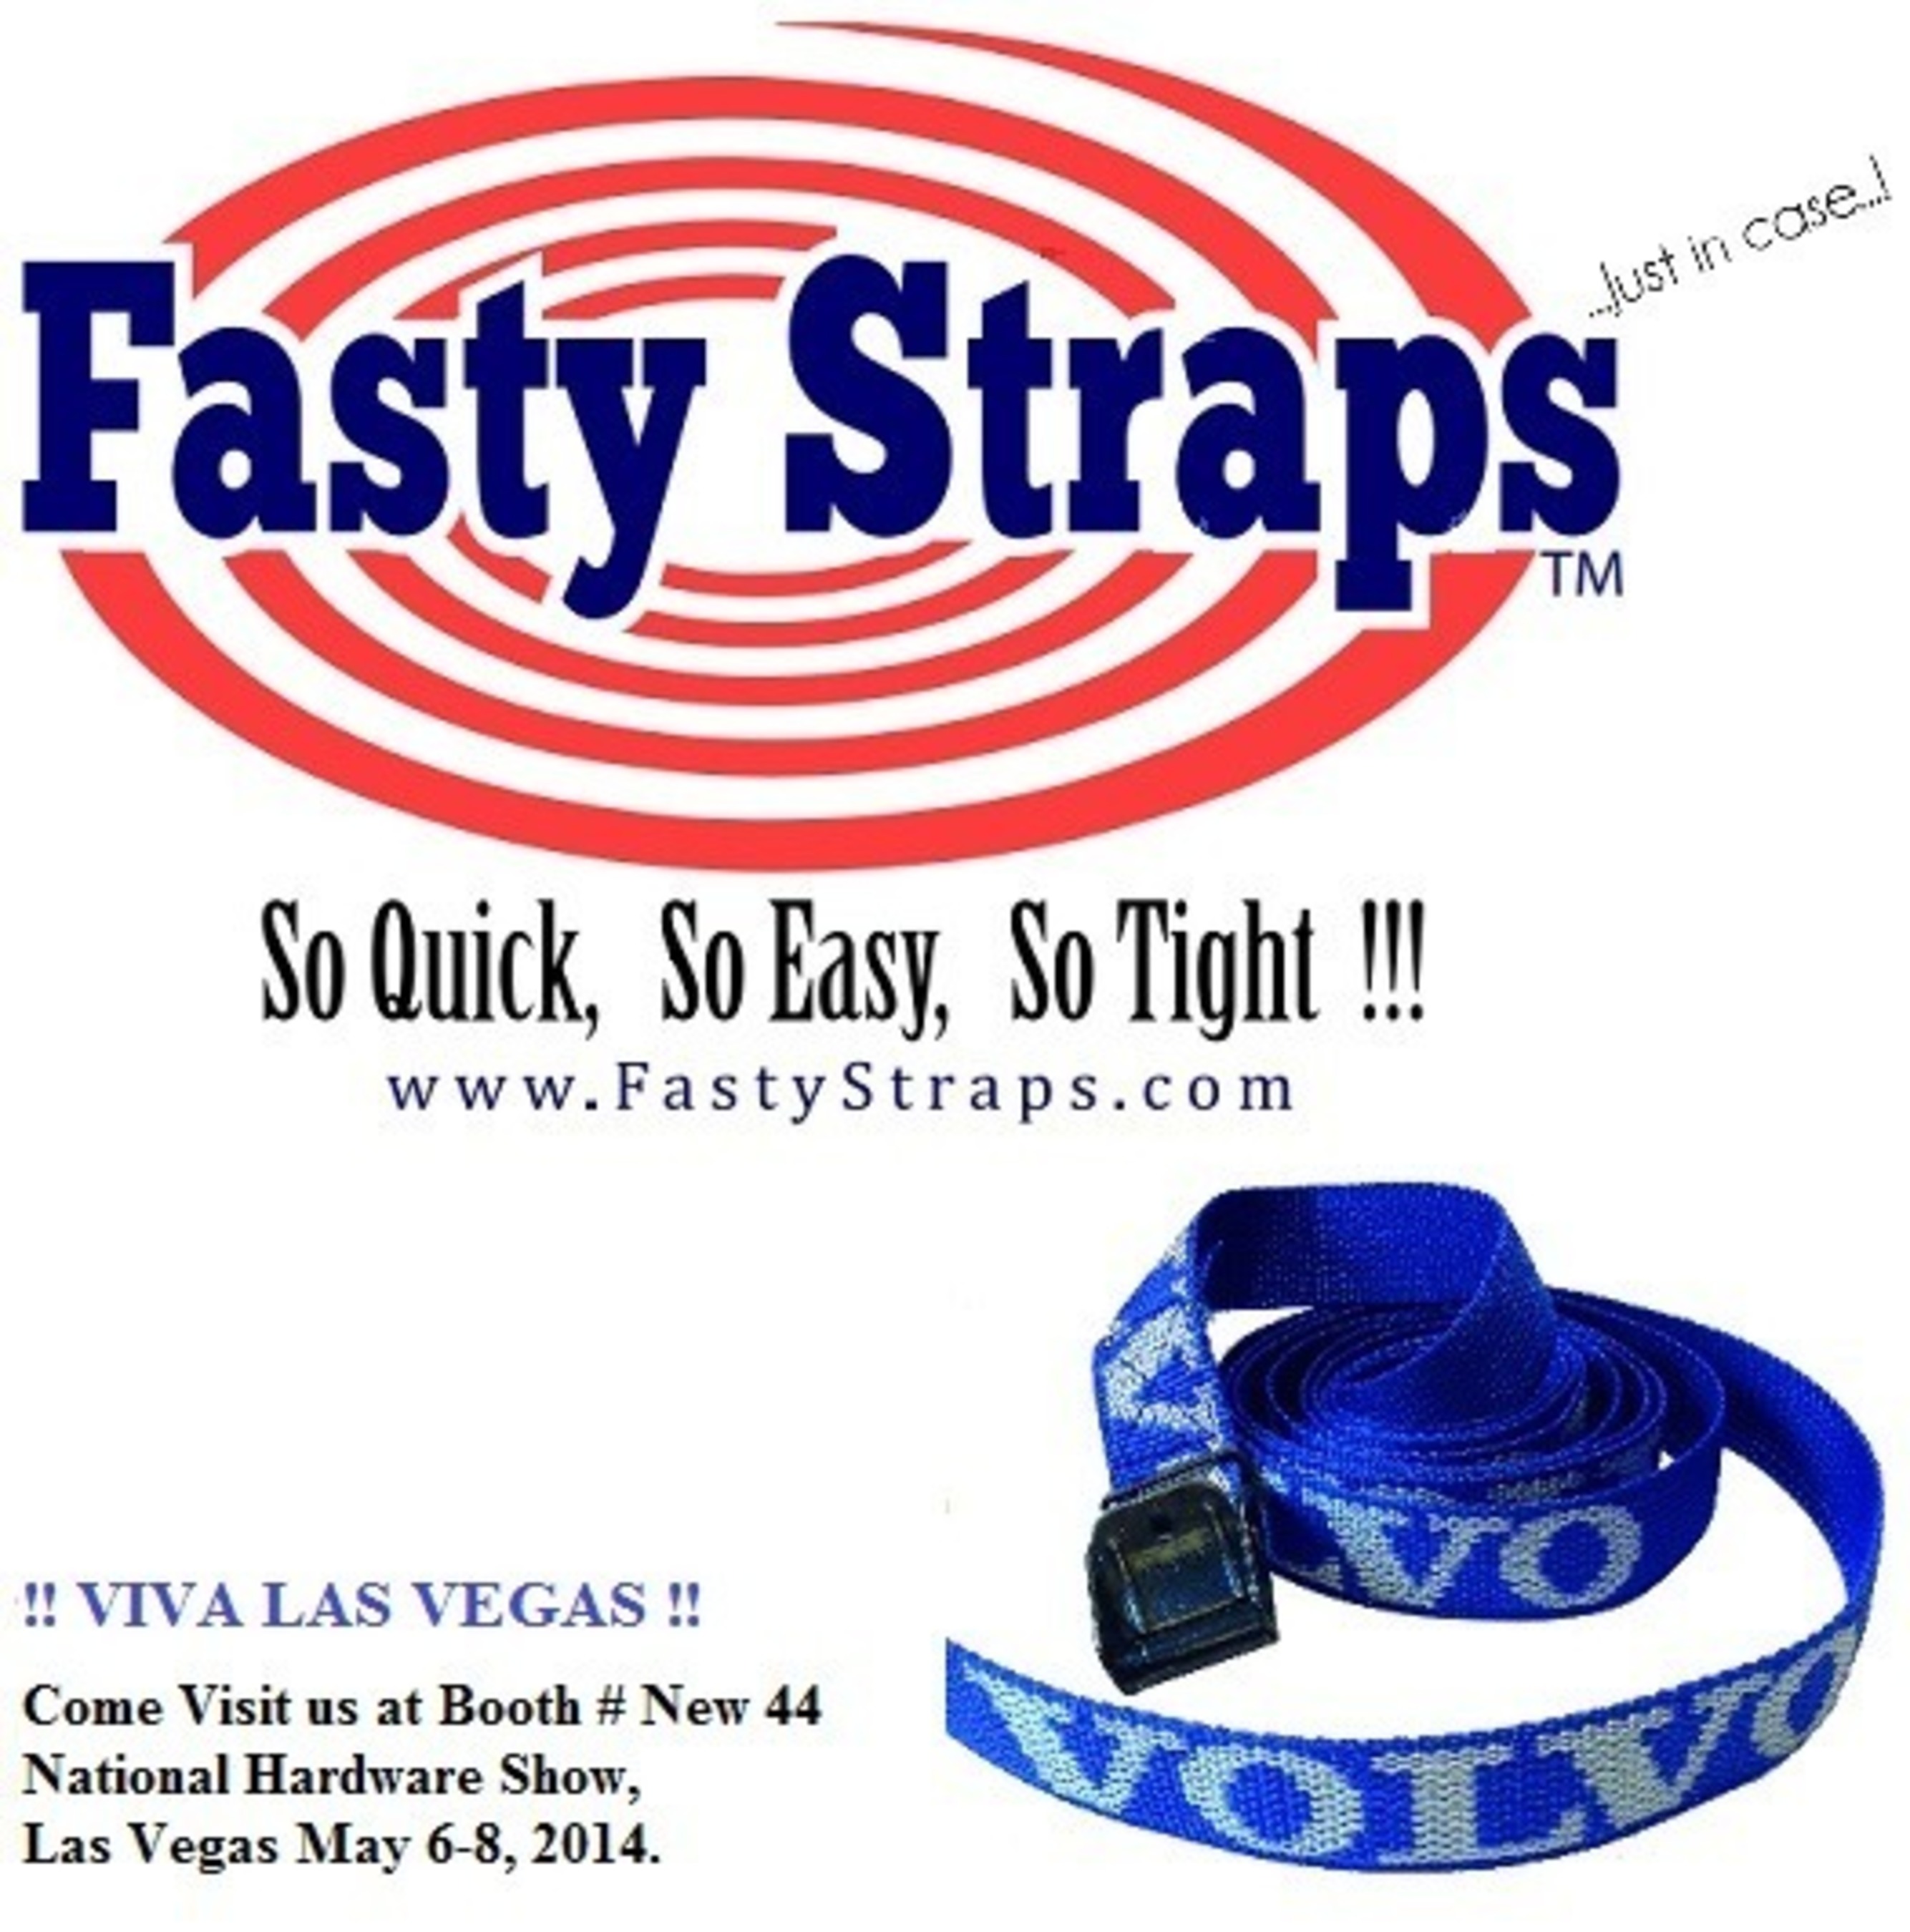 http://www.FastyStraps.com -   Fasty Straps™ are the easiest, quickest, strongest  "light load" tie down strap ever made, and is the only tie down in the world with a LIFETIME REPLACEMENT GUARANTEE.  !!!!!!!! NOW AVAILABLE IN NORTH AMERICA !!!!!!!!! Precision engineered and manufactured in Sweden for 30 years to Volvo standards -Fasty Straps™ carries the prestigious ISO, TUV (OSHA LAB) manufacturing certificates, making it the world's most "decorated" tie down... see our website for more information!! (PRNewsFoto/Fasty North America, Inc.)